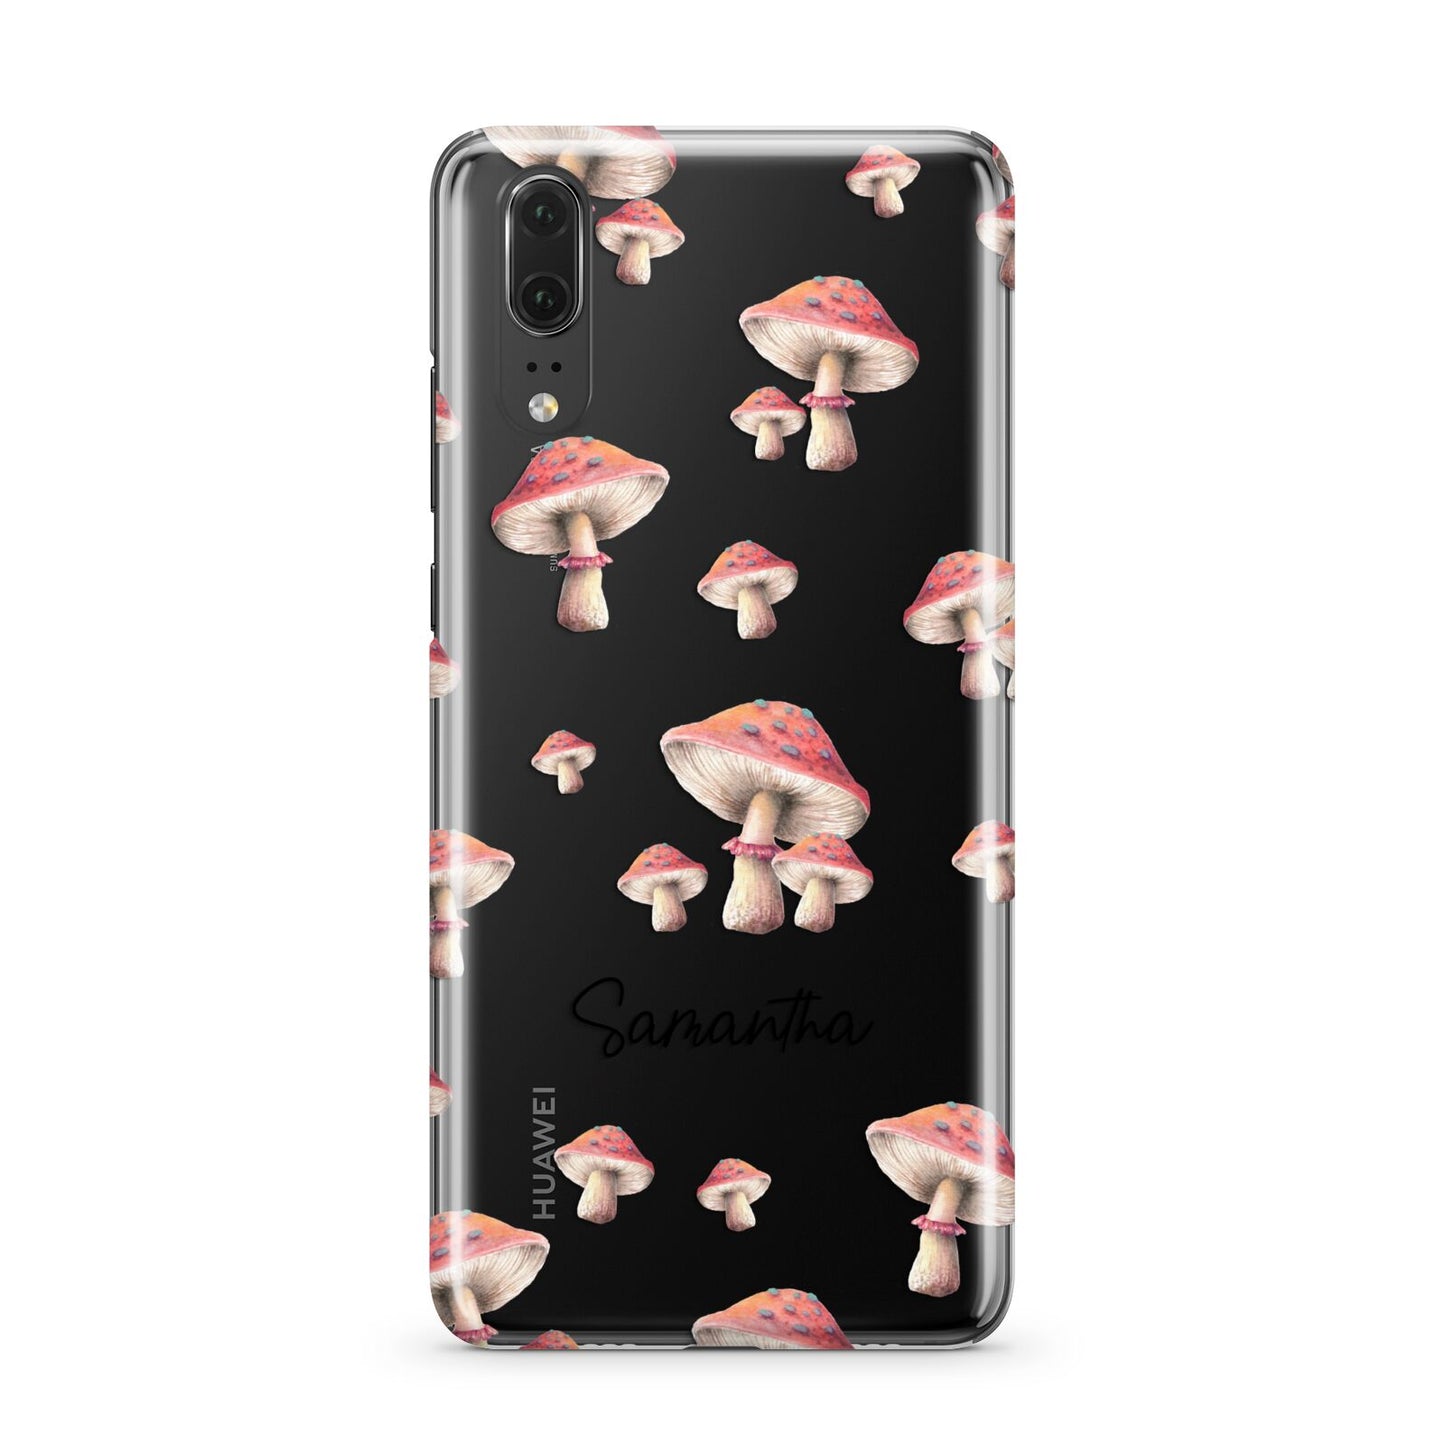 Mushroom Illustrations with Name Huawei P20 Phone Case